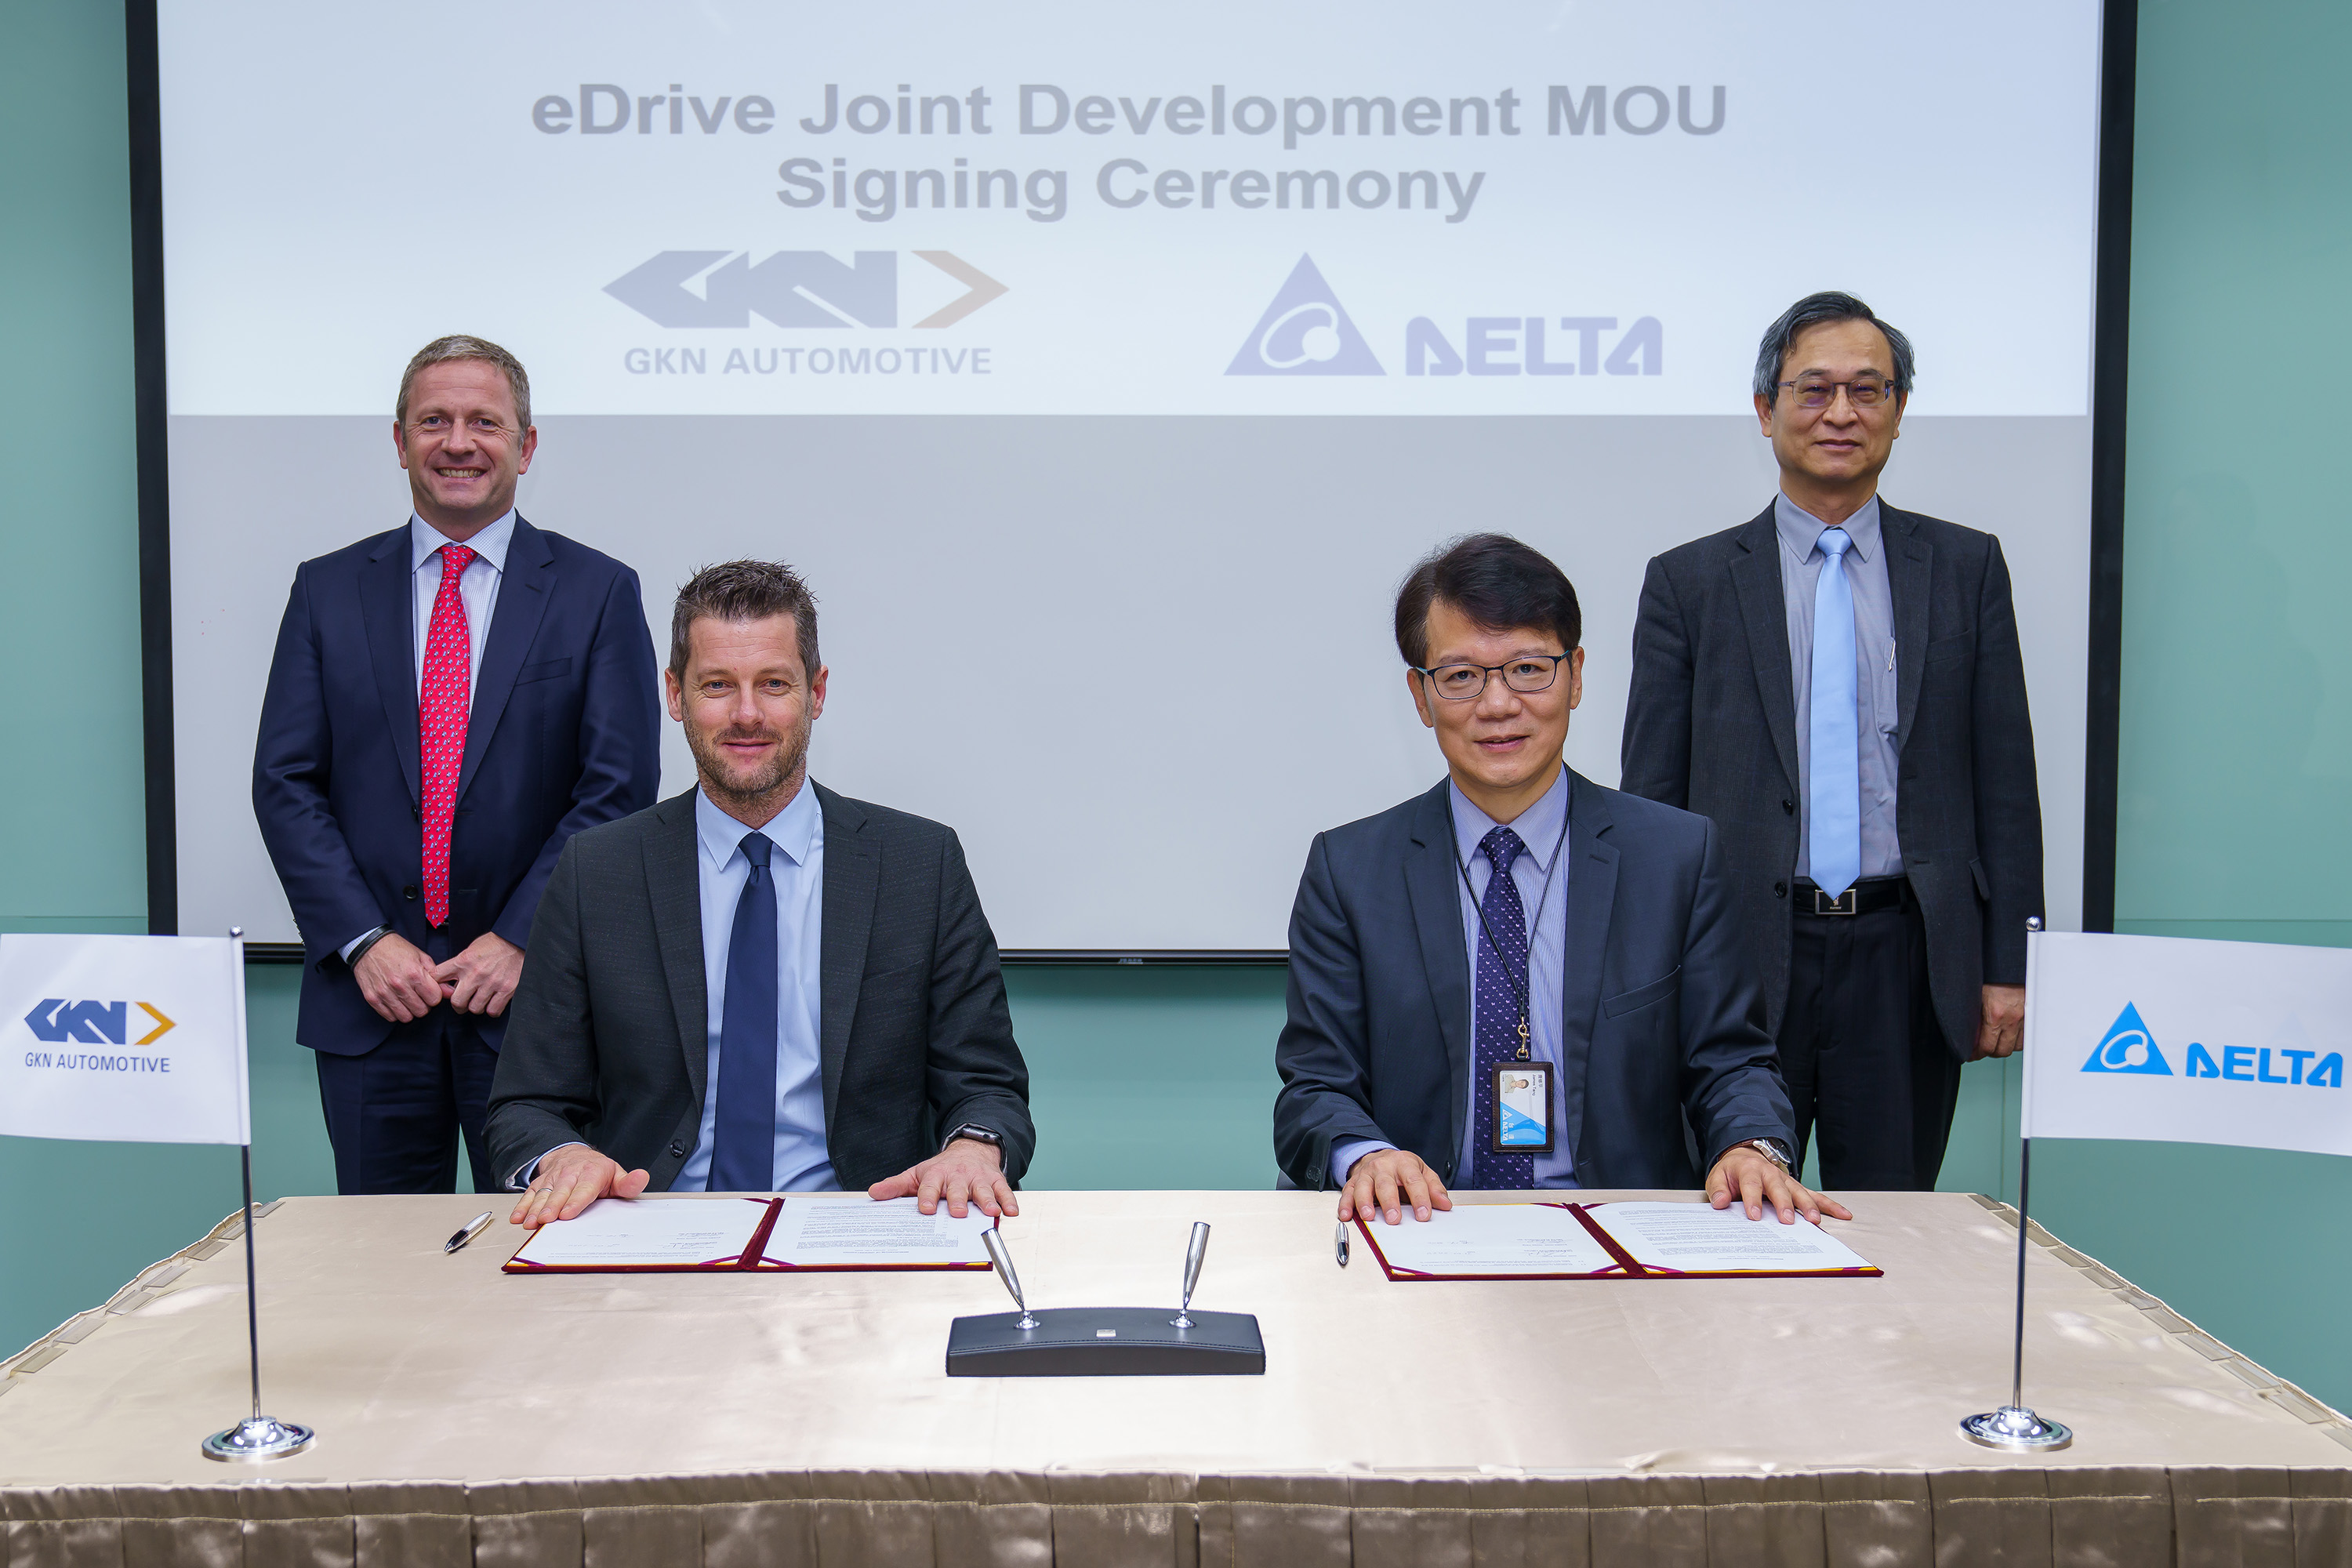 L-R: Liam Butterworth, CEO, GKN Automotive; Hannes Prenn, COO, ePowertrain, GKN Automotive; Simon Chang, COO, Delta Electronics; James Tang, VP and GM of Electric Vehicle Solutions Business Group of Delta Electronics